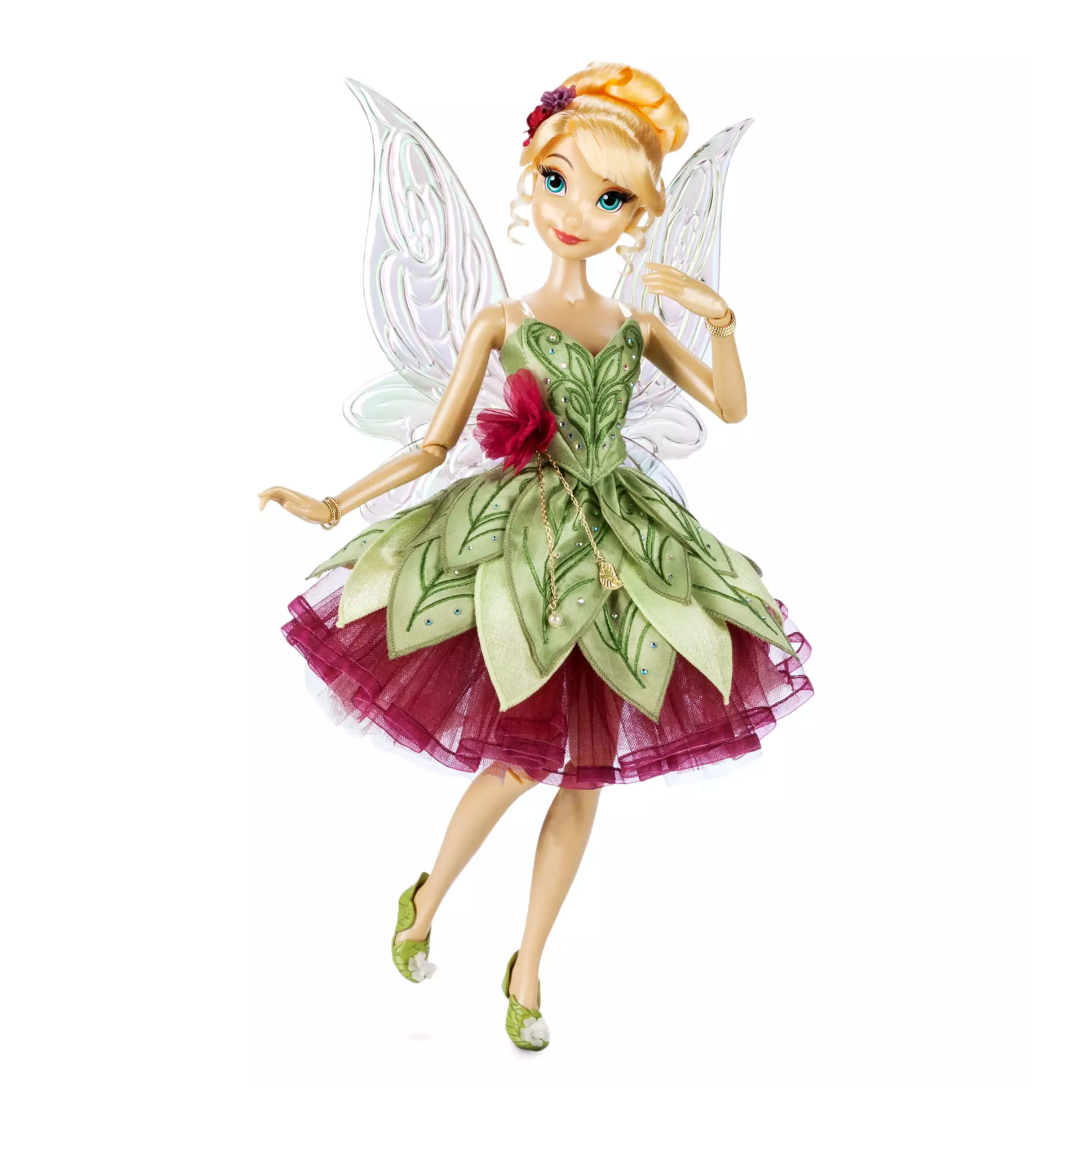 Disney Peter Pan 70th Anniversary Tinker Bell Limited Edition Doll New with Box